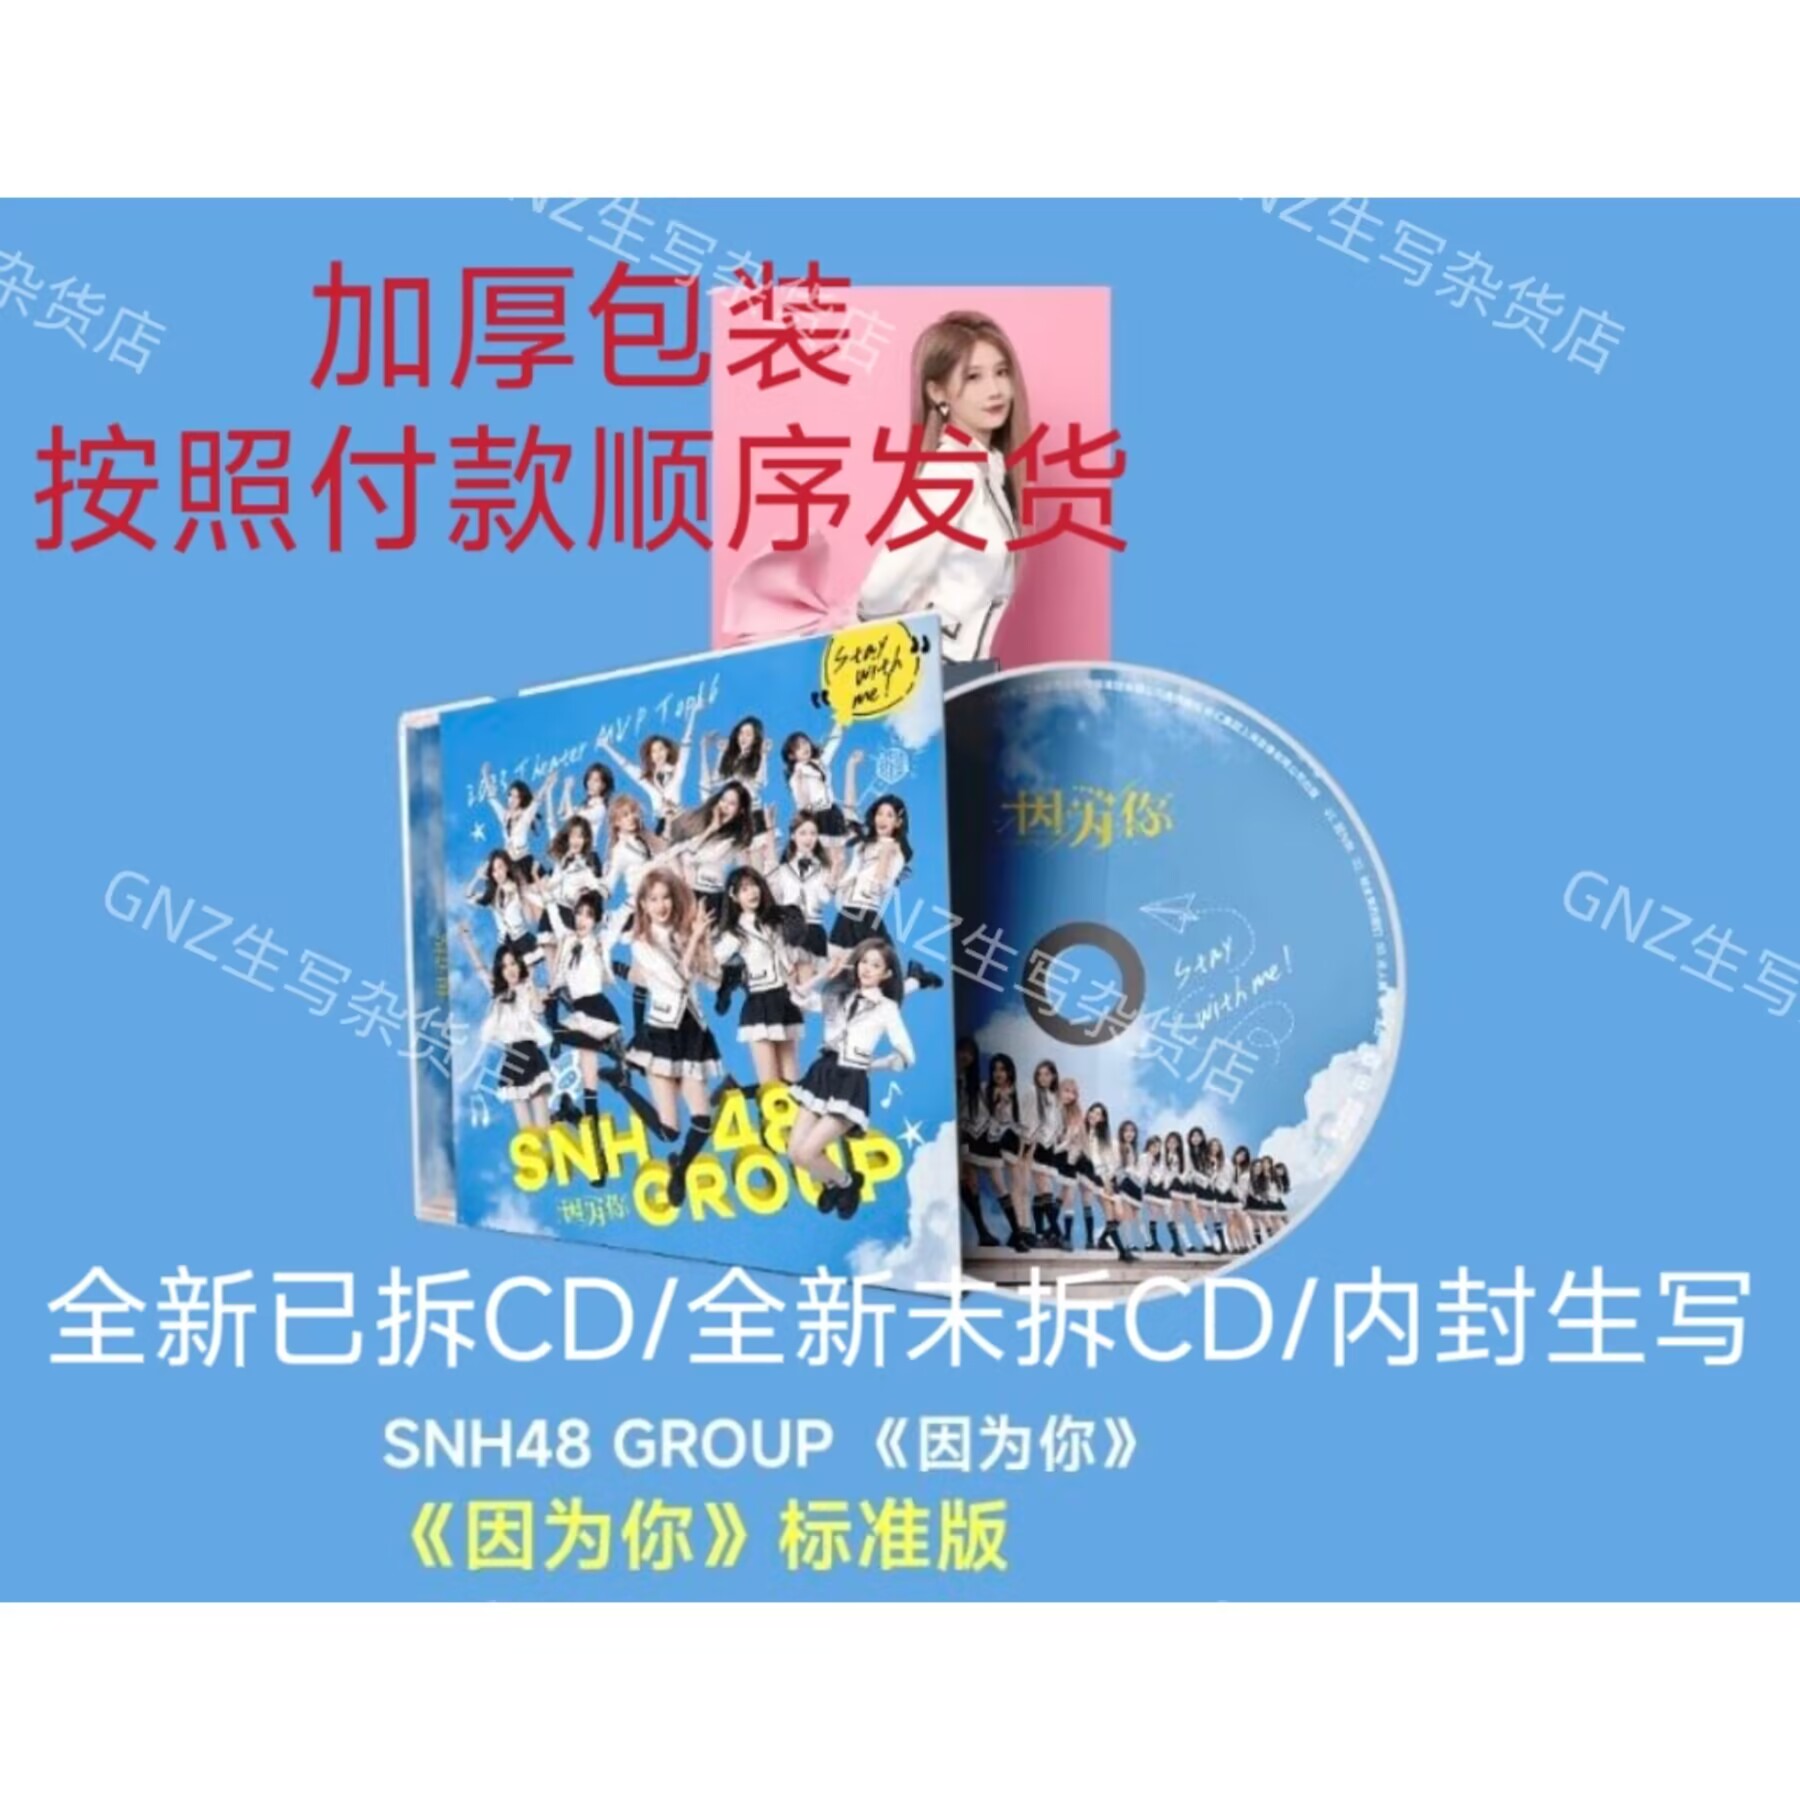 SNH48 GROUP 「 Because of You 」 通常盤 新品未開封 ディスク内ジャケット